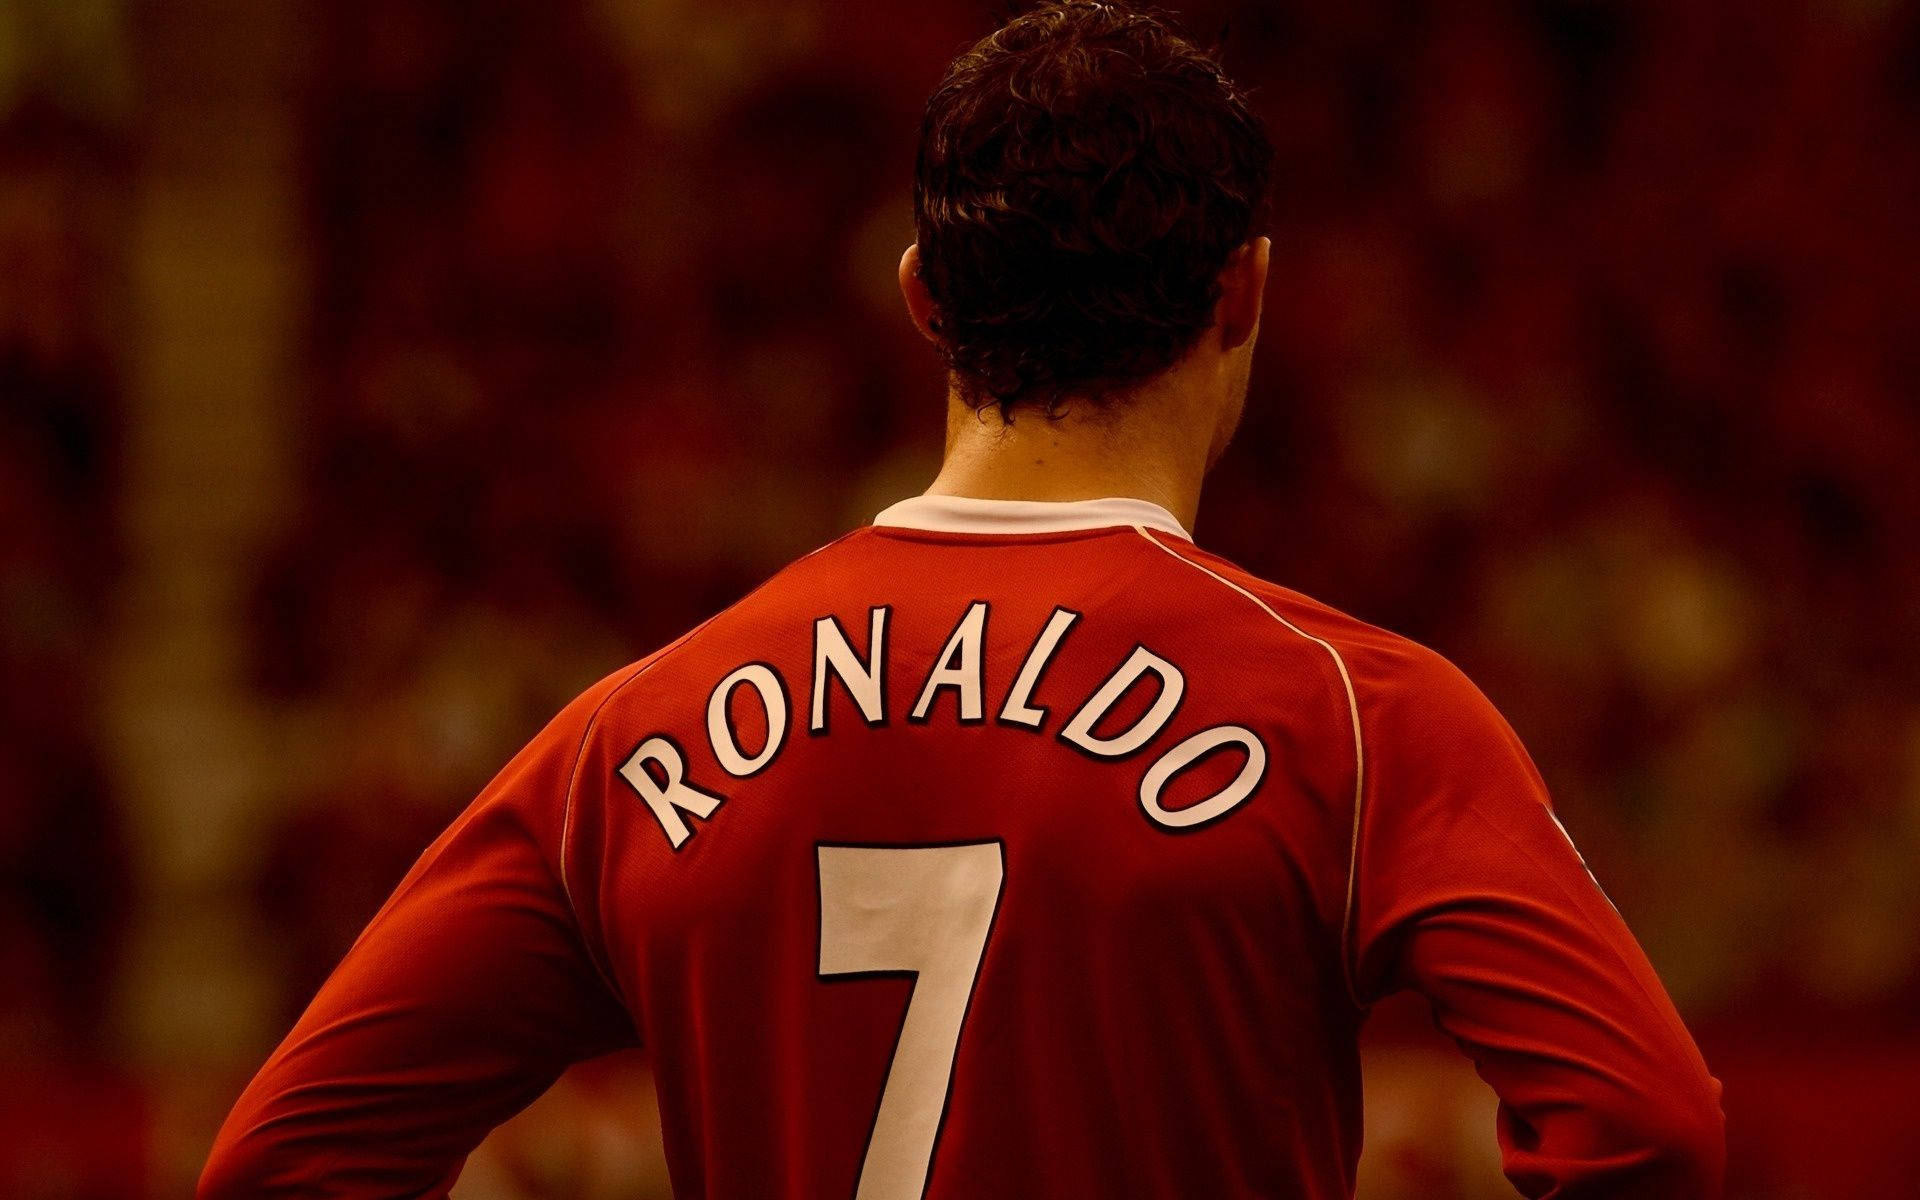 Cristiano Ronaldo Manchester United Jersey Number Wallpaper